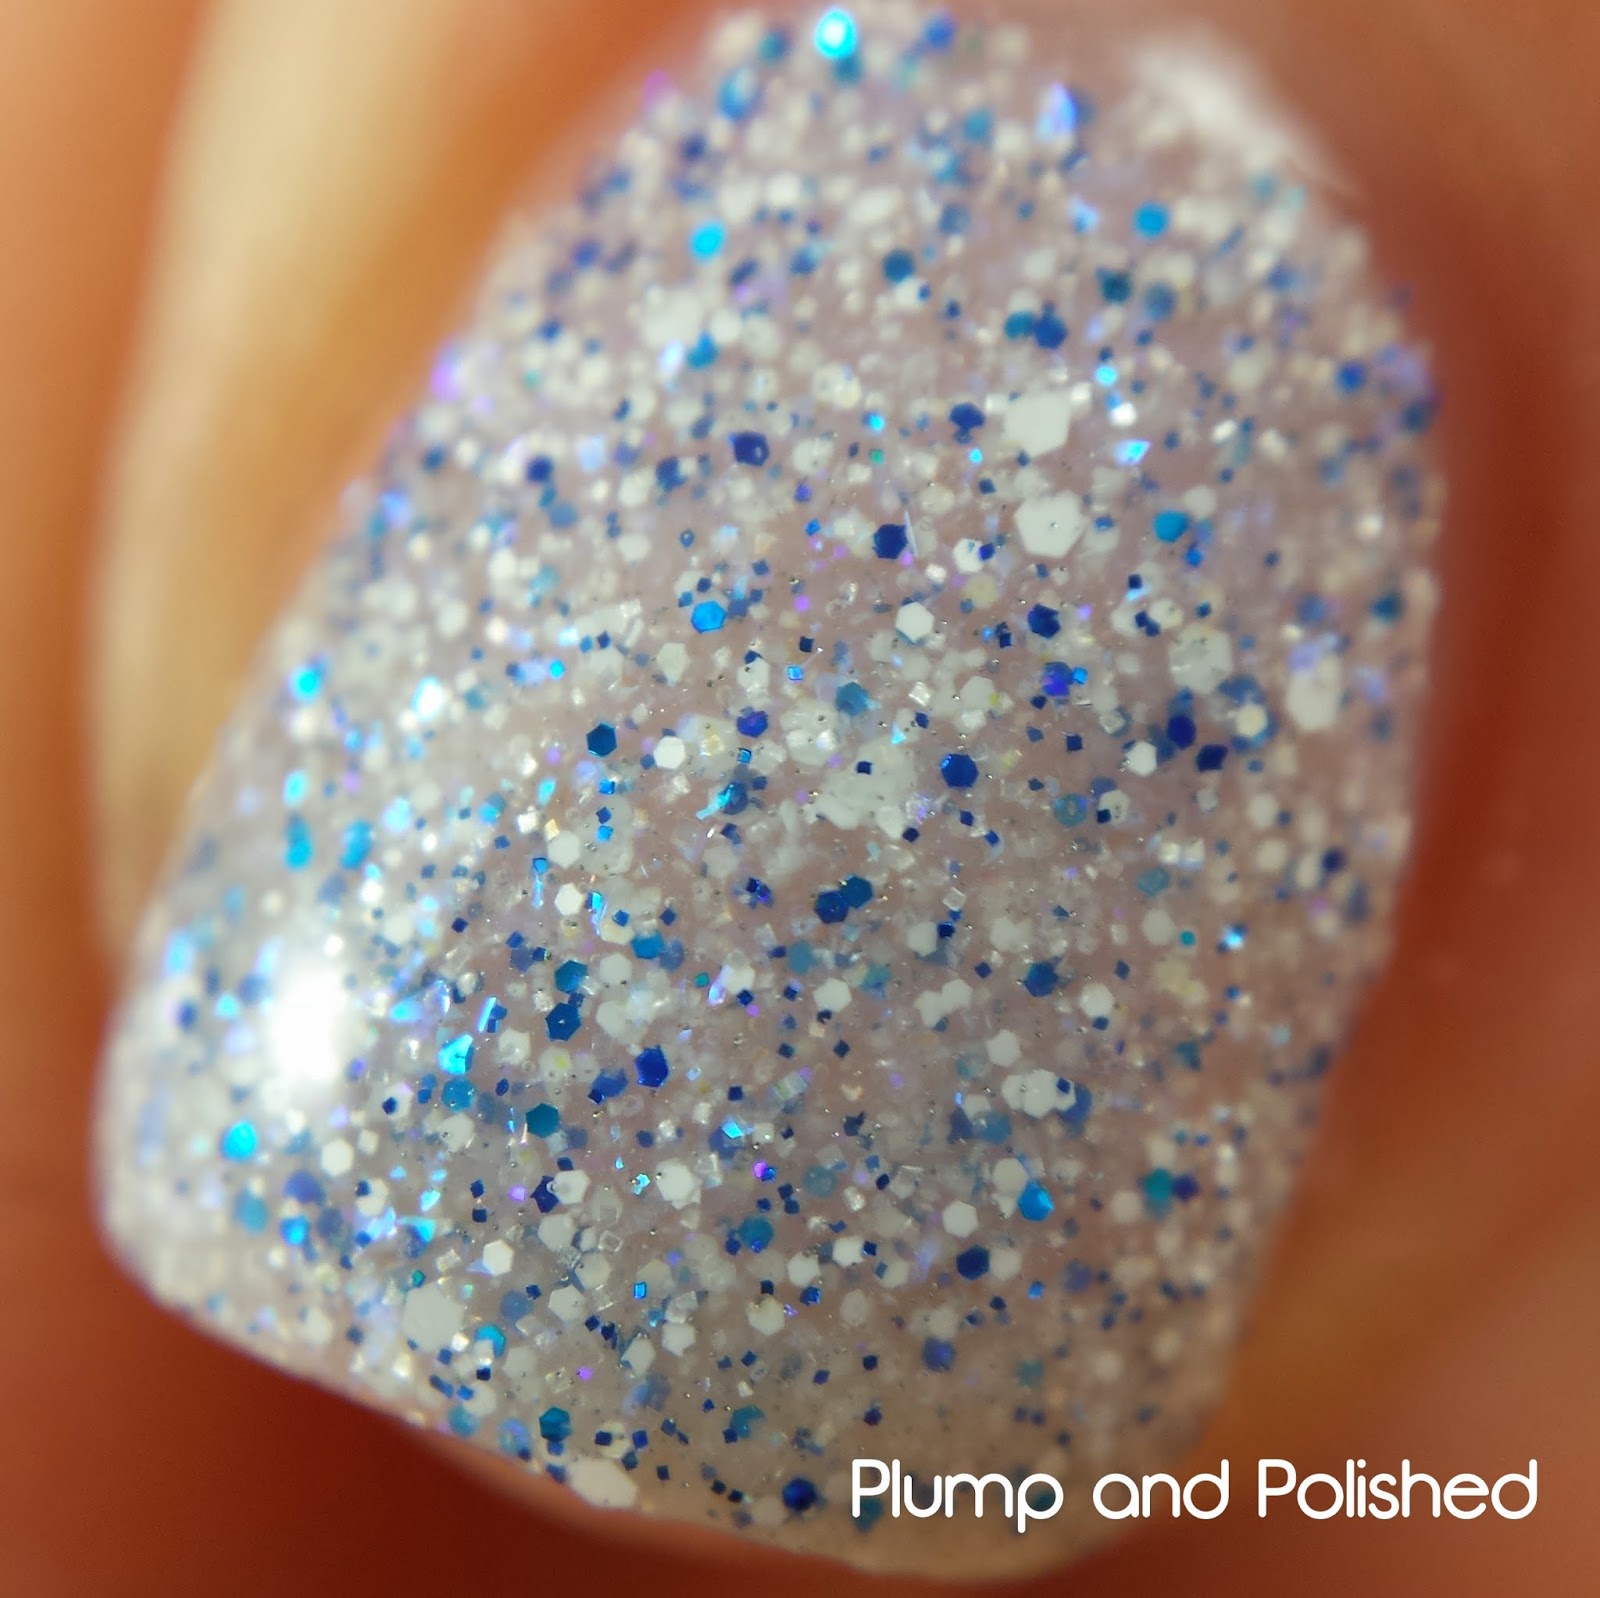 Blue-Eyed Girl Lacquer - The Years Have Been Short